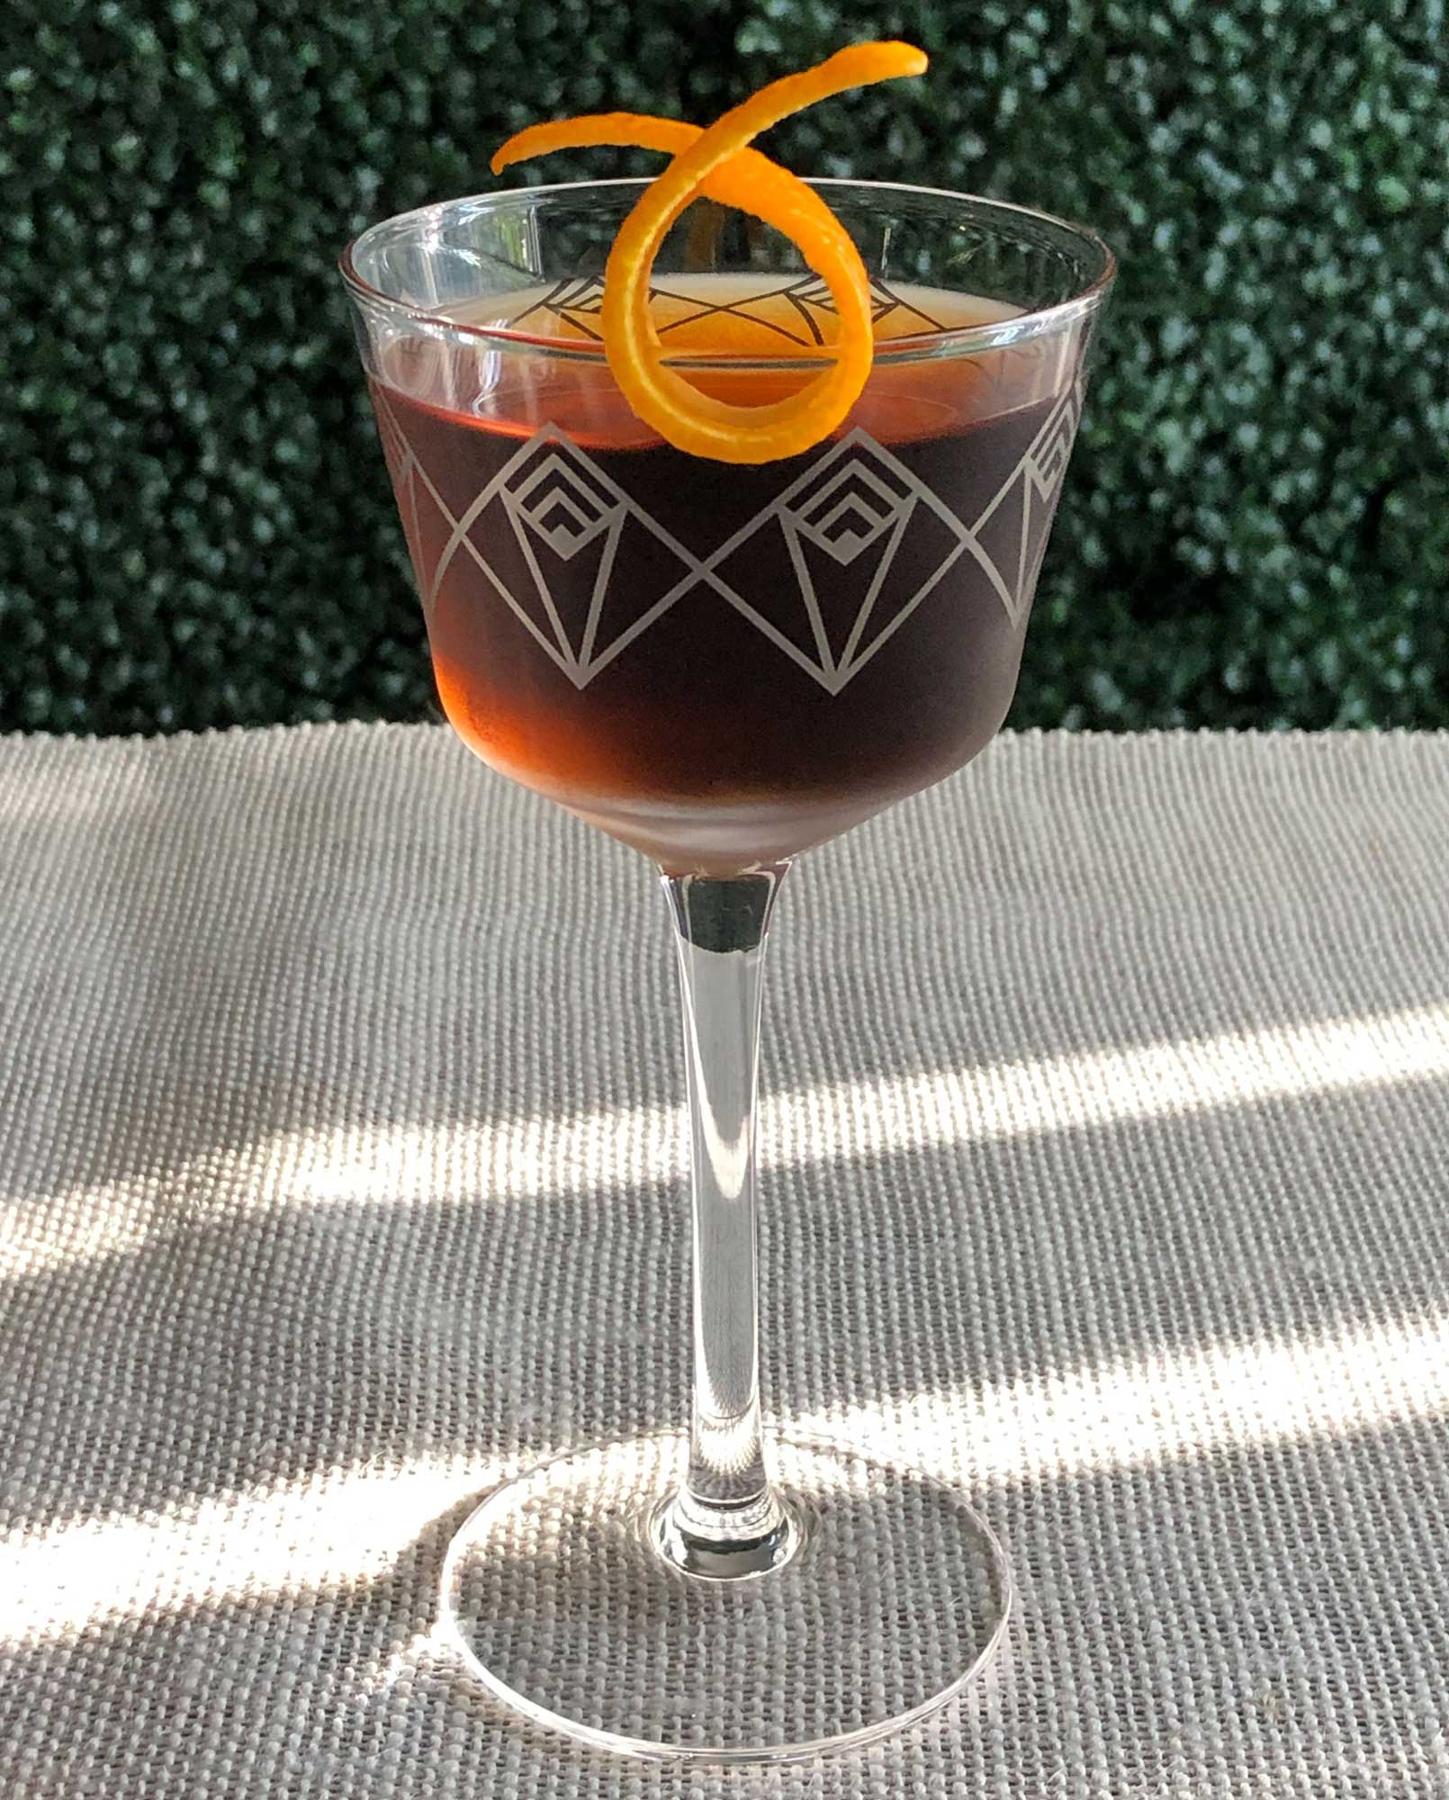 An example of the Reforma, the mixed drink (drink) featuring reposado tequila, Bonal Gentiane-Quina, orange bitters, and orange twist; photo by Lee Edwards